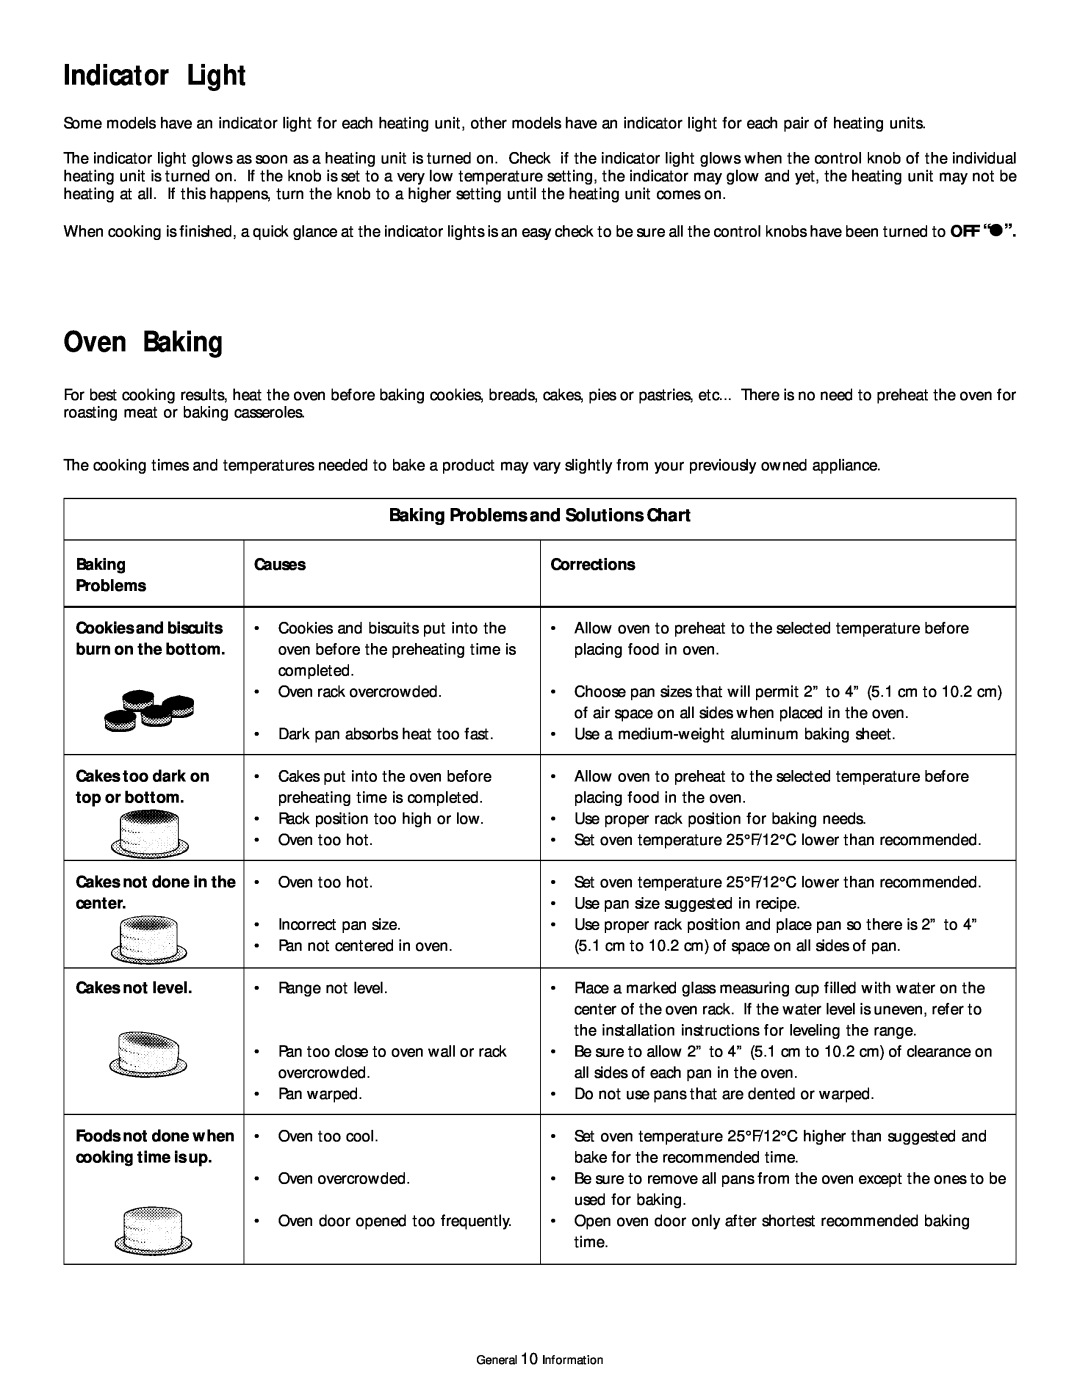 Frigidaire 318200407 Indicator Light, Oven Baking, Baking Problems and Solutions Chart, Causes, Corrections, top or bottom 